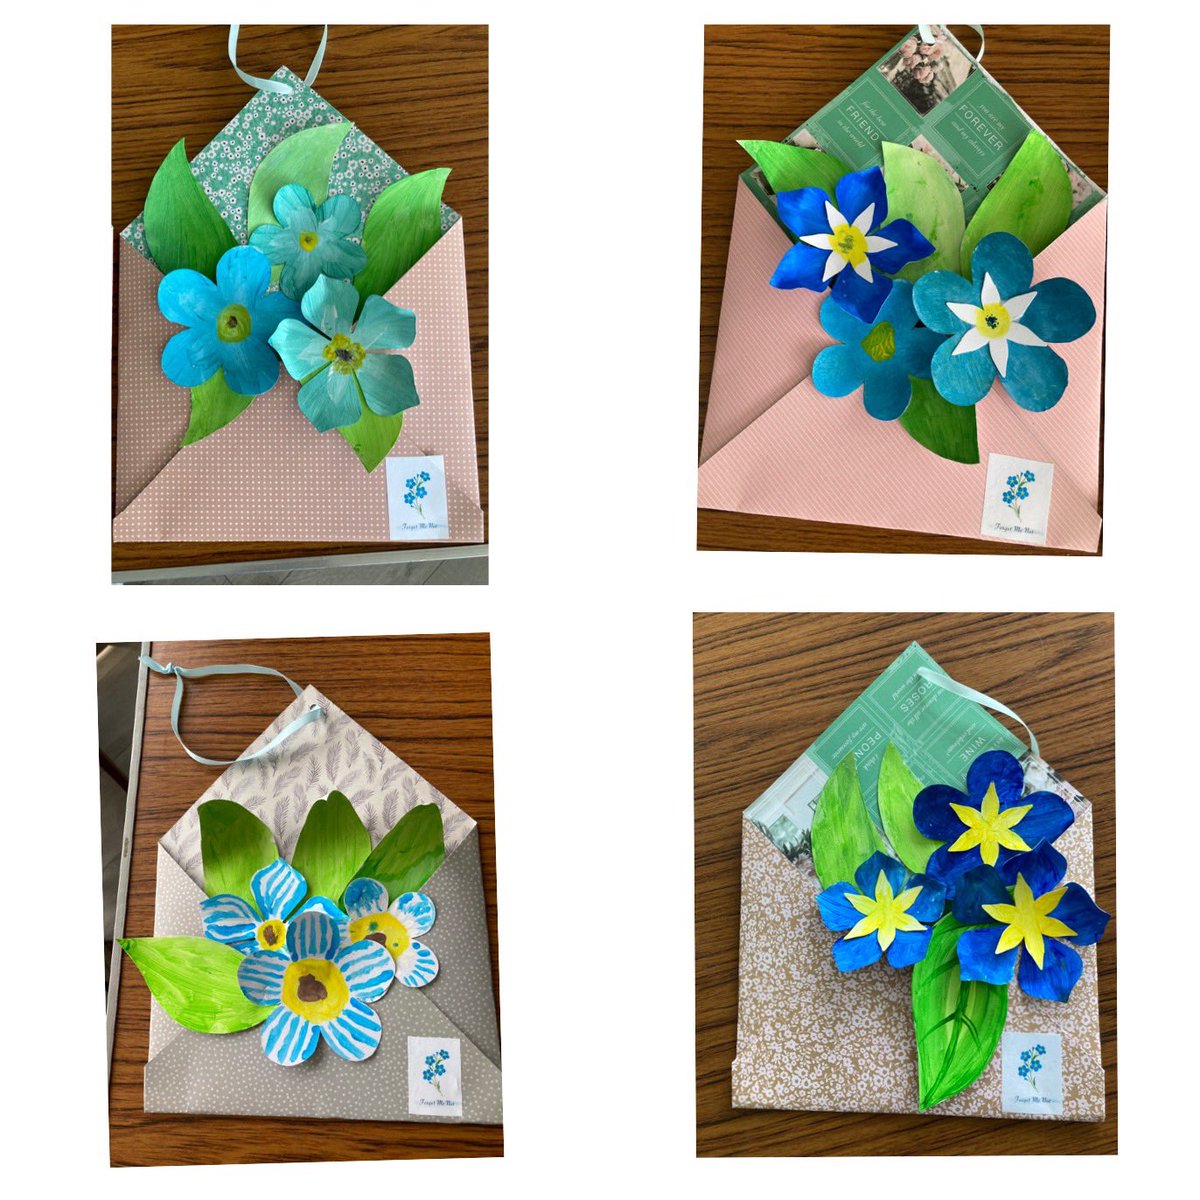 A fabulous start to our #DementiaActionWeek projects with the ladies and gentlemen at All Sorts Dementia Group in #Sawbridgeworth.

Lots of #ForgetMeNot painted for our group project and individual pieces 

#creativemojo #communitygroup #community @DementiaFriends @alzheimerssoc